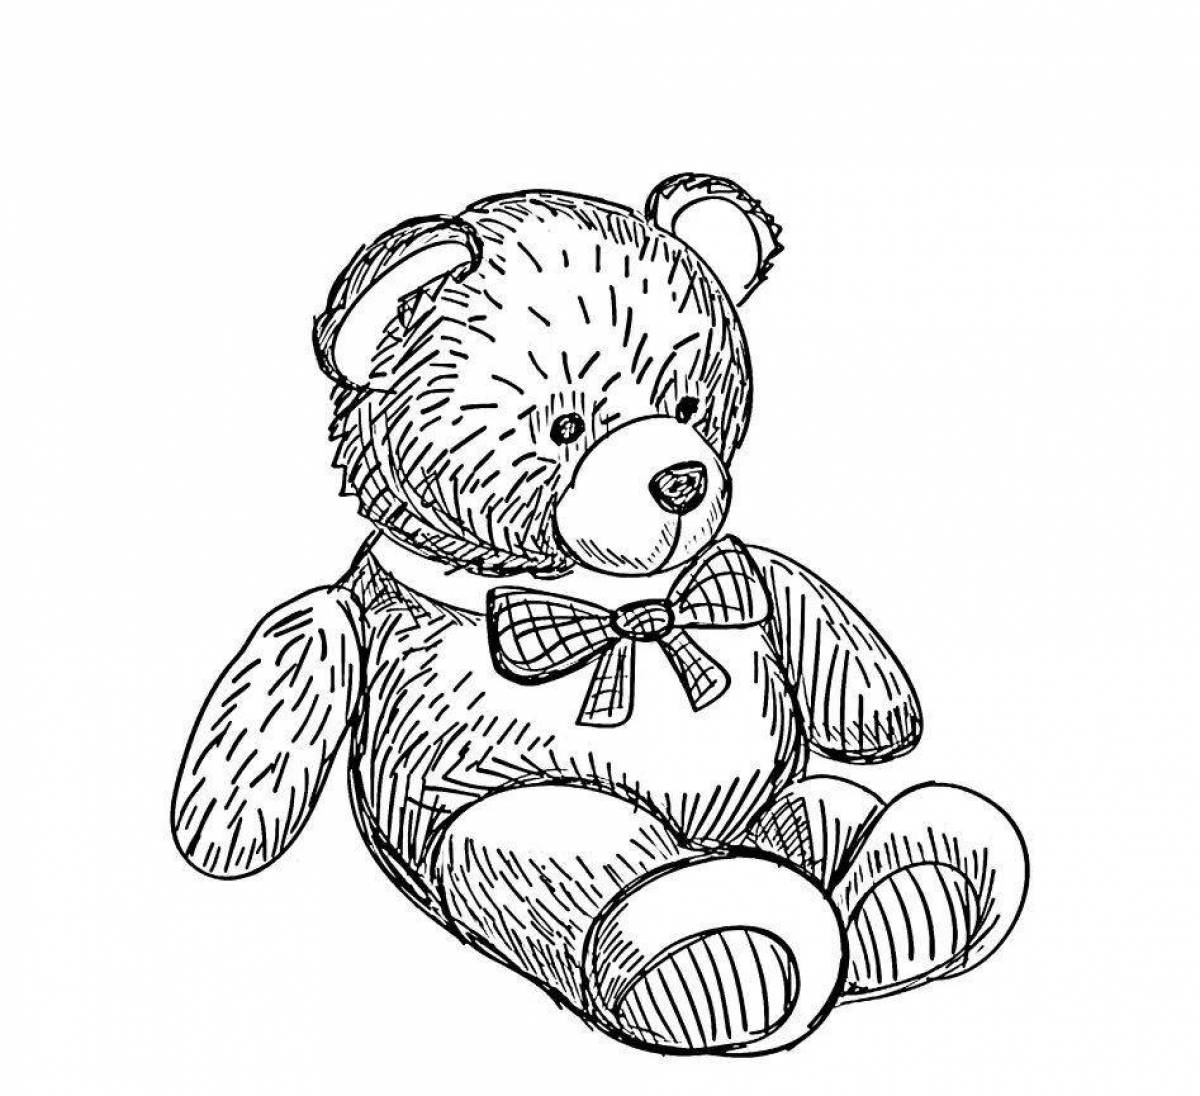 Sparkling teddy bear coloring page